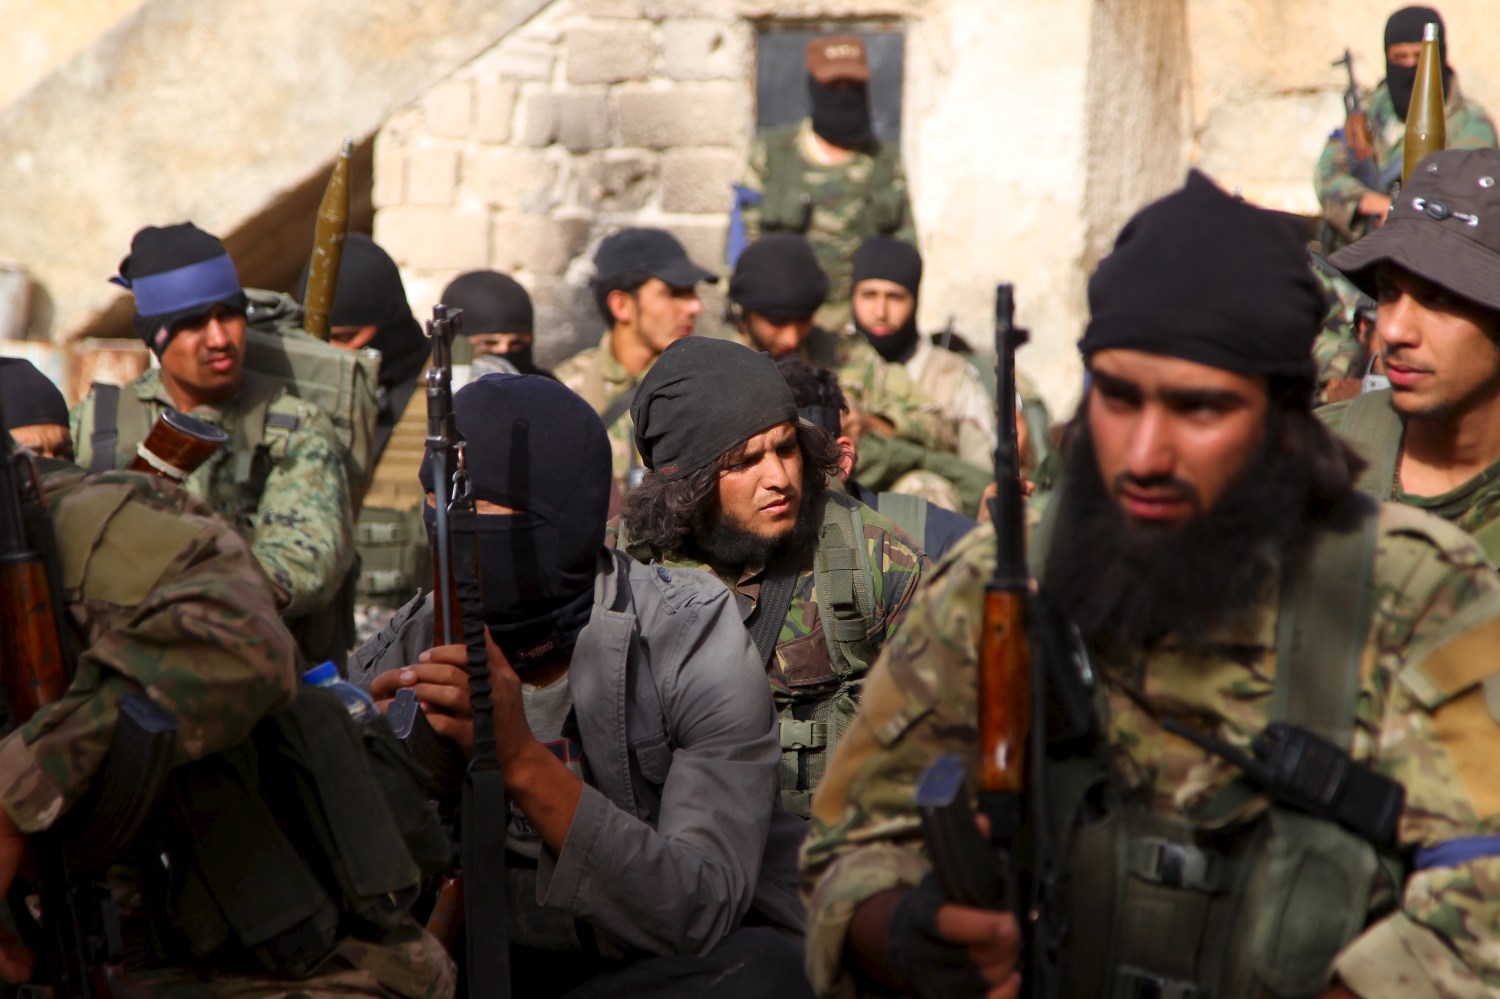 Members of al Qaeda's Nusra Front gather before moving towards their positions during an offensive to take control of the northwestern city of Ariha from forces loyal to Syria's President Bashar al-Assad, in Idlib province May 28, 2015. The Syrian army has pulled back from the northwestern city of Ariha after a coalition of insurgent groups seized the last city in Idlib province in northwestern Syria near the Turkish border that was still held by the government. REUTERS/Ammar Abdullah - RTR4XXNU